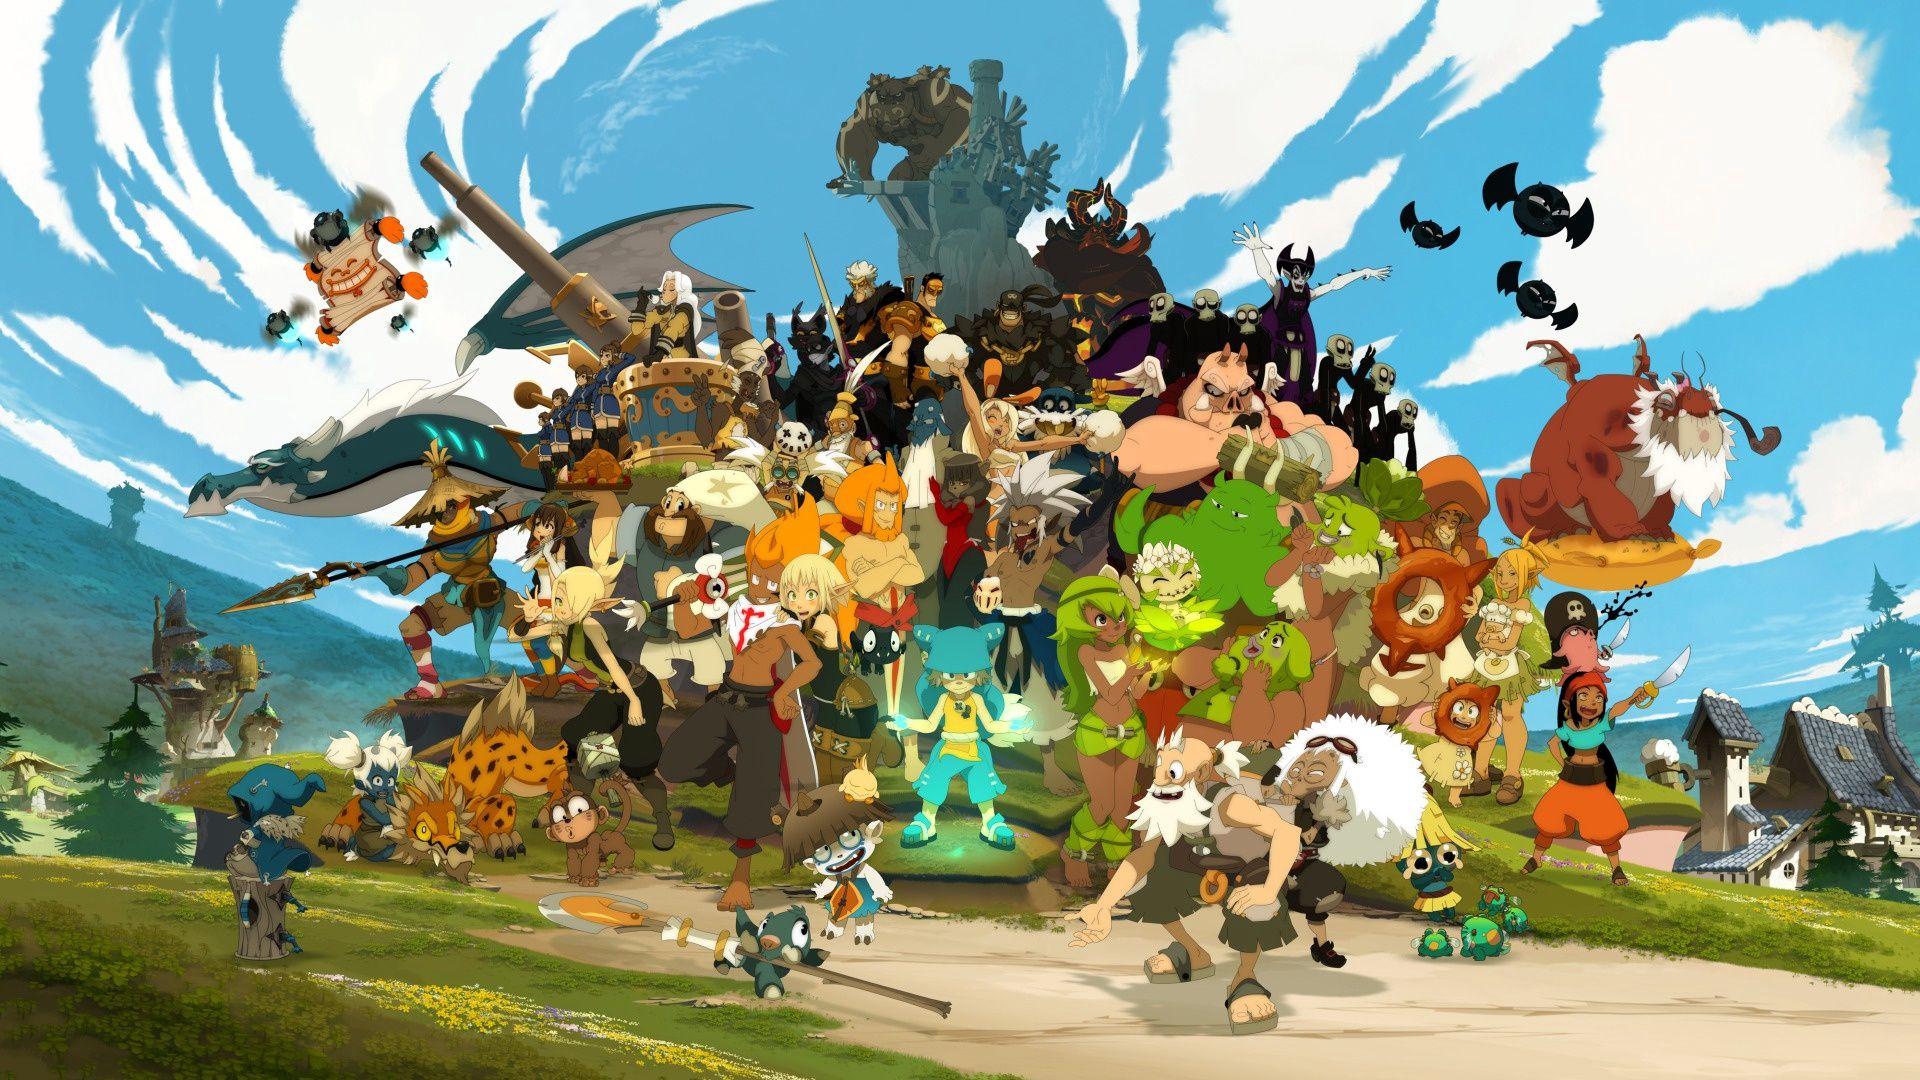 View, download, comment, and rate this 1920x1080 Wakfu